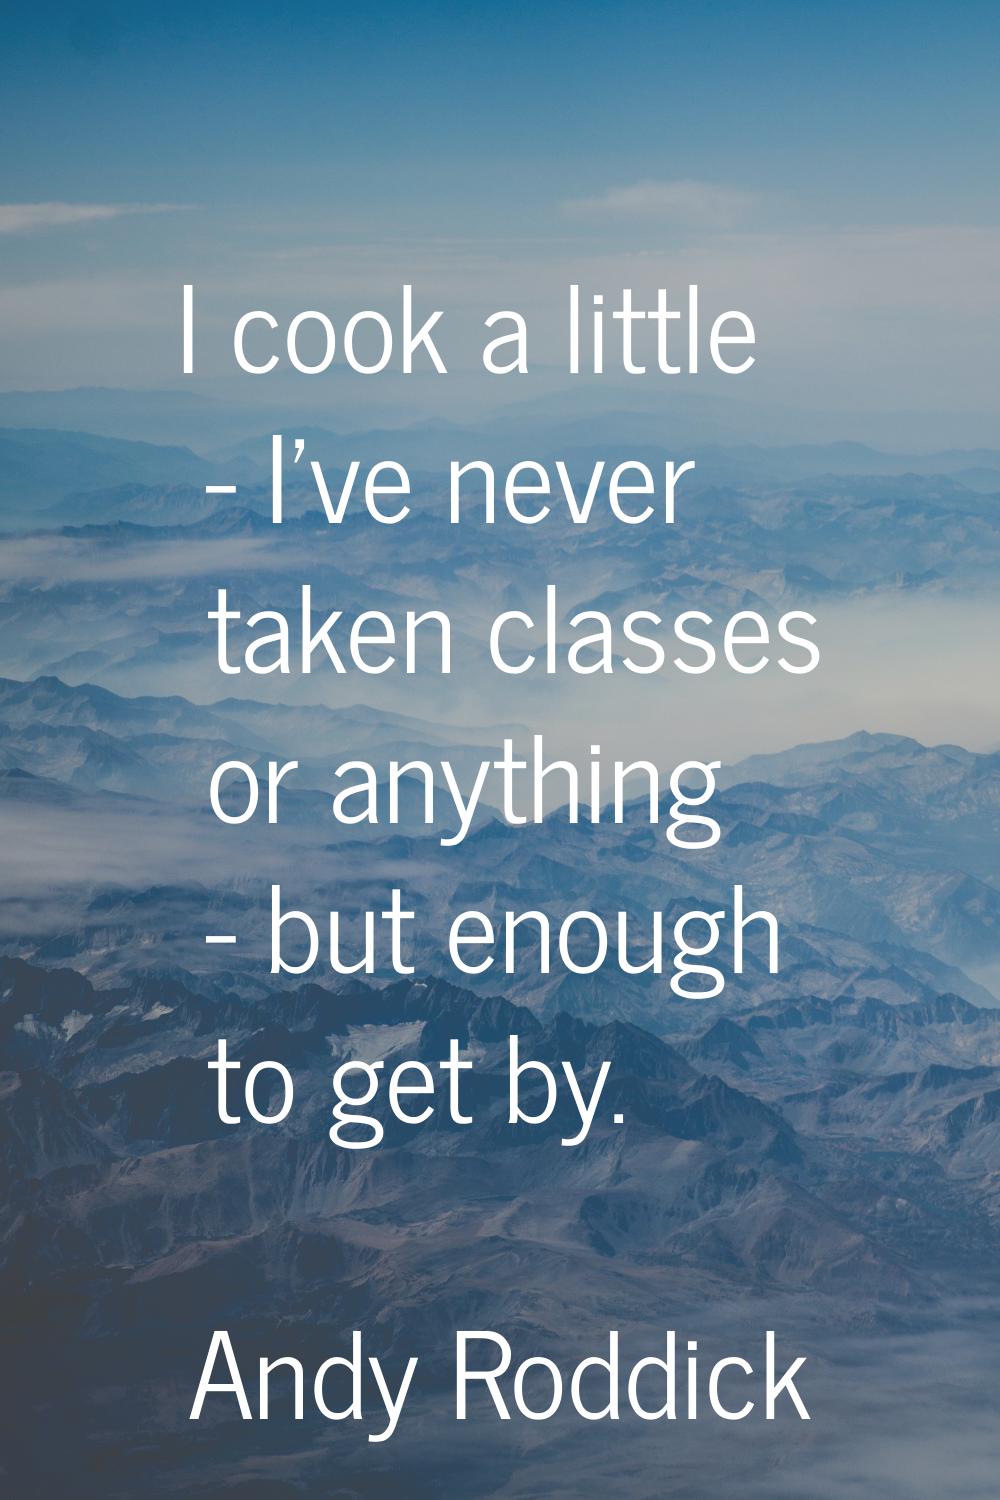 I cook a little - I've never taken classes or anything - but enough to get by.